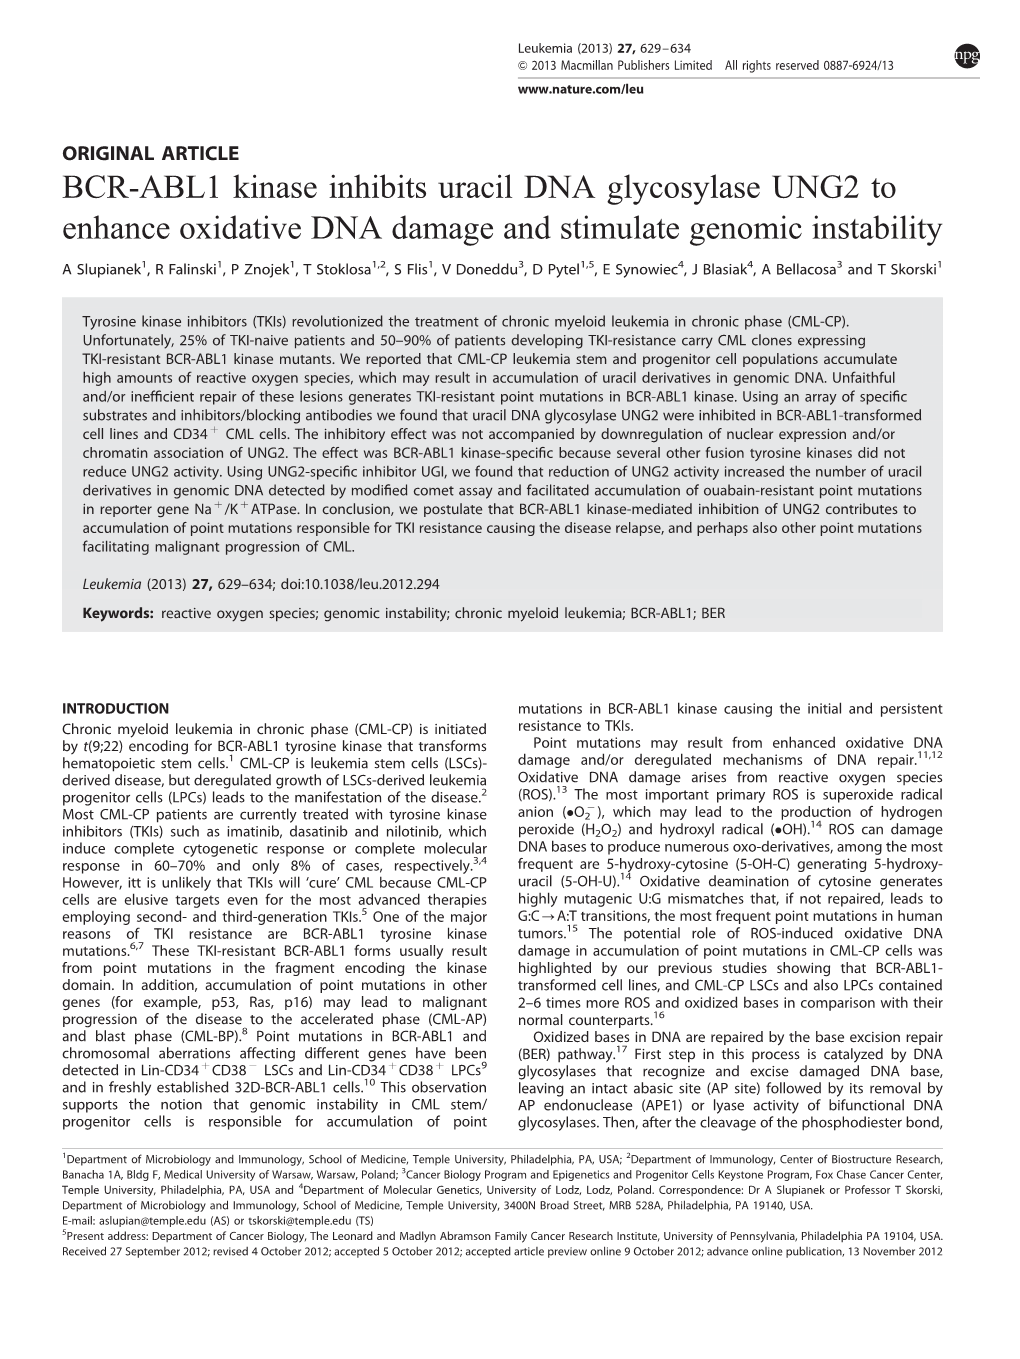 BCR-ABL1 Kinase Inhibits Uracil DNA Glycosylase UNG2 to Enhance Oxidative DNA Damage and Stimulate Genomic Instability